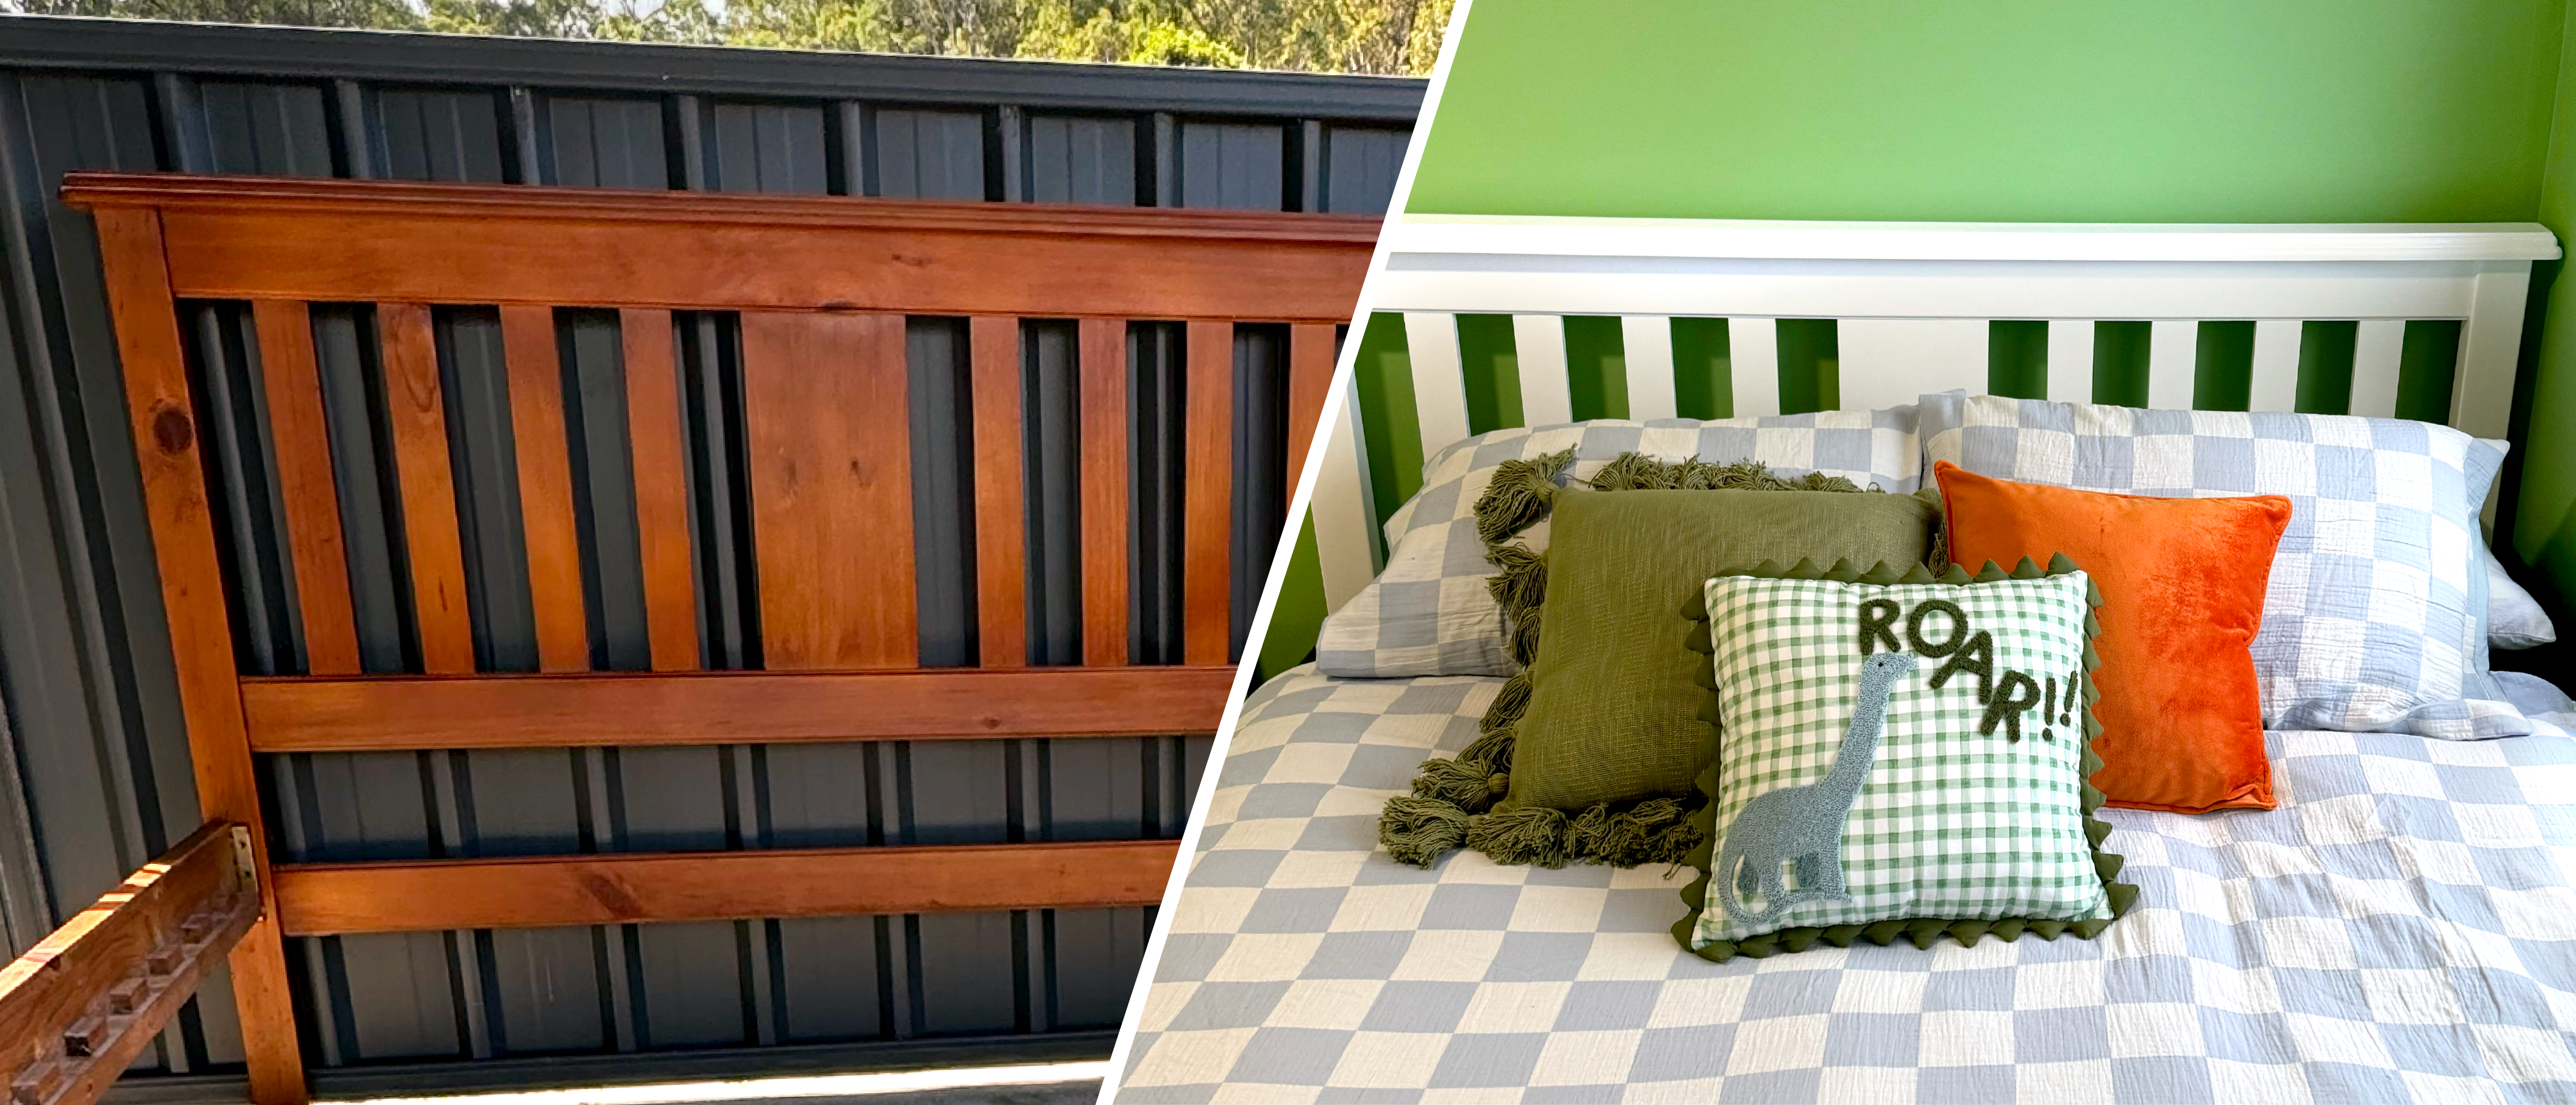 Upcycle Your Old Wooden Furniture In 3 Easy Steps